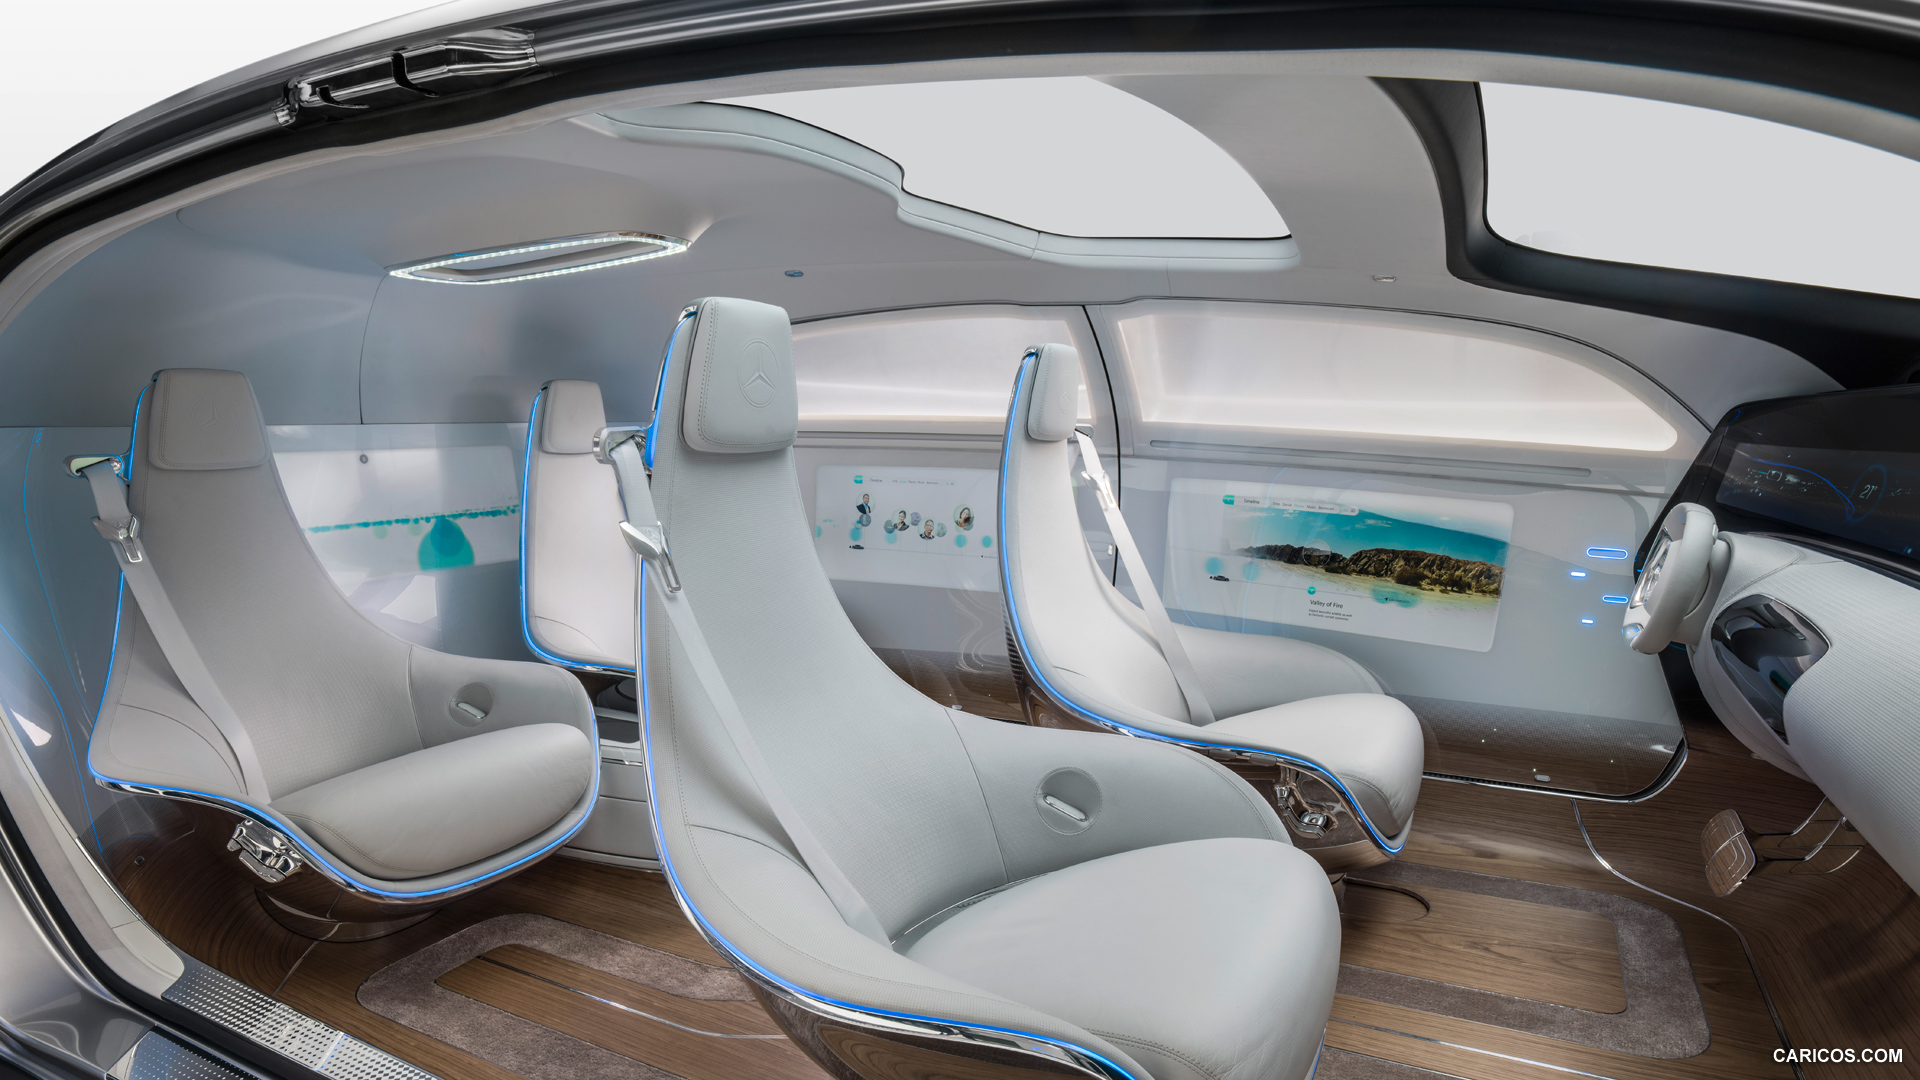 2015 Mercedes-Benz F 015 Luxury in Motion Concept  - Interior, #25 of 92